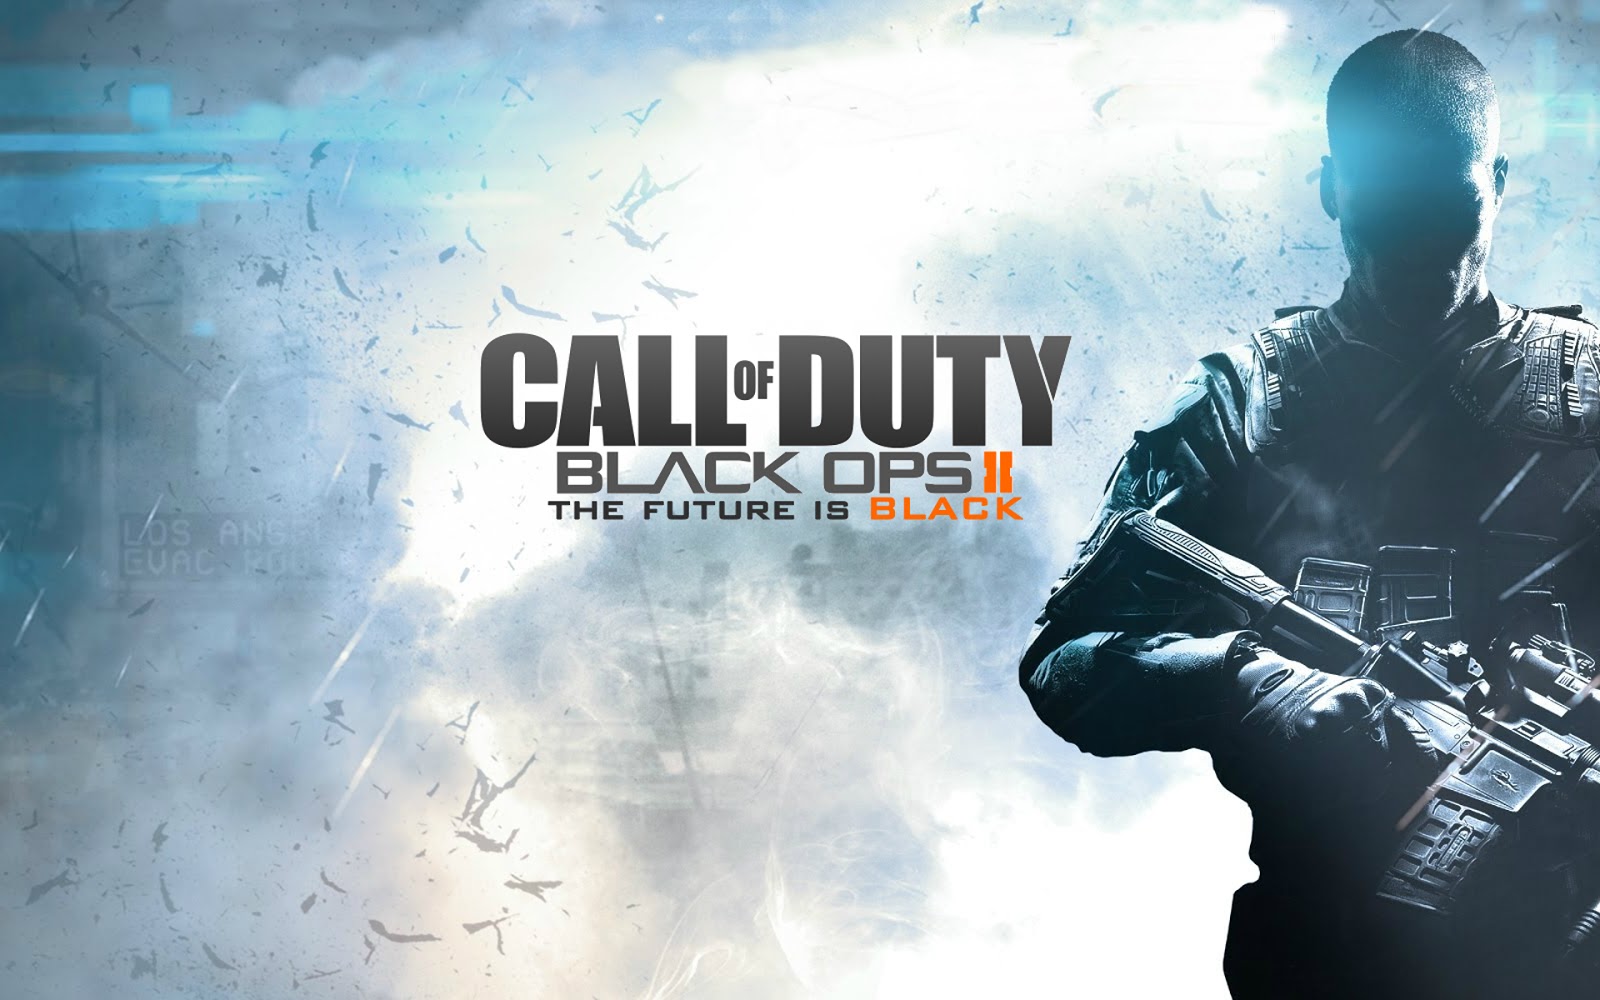 Call of Duty Black Ops 2 Game Wallpaper HD #2 | Game Wallpapers HD